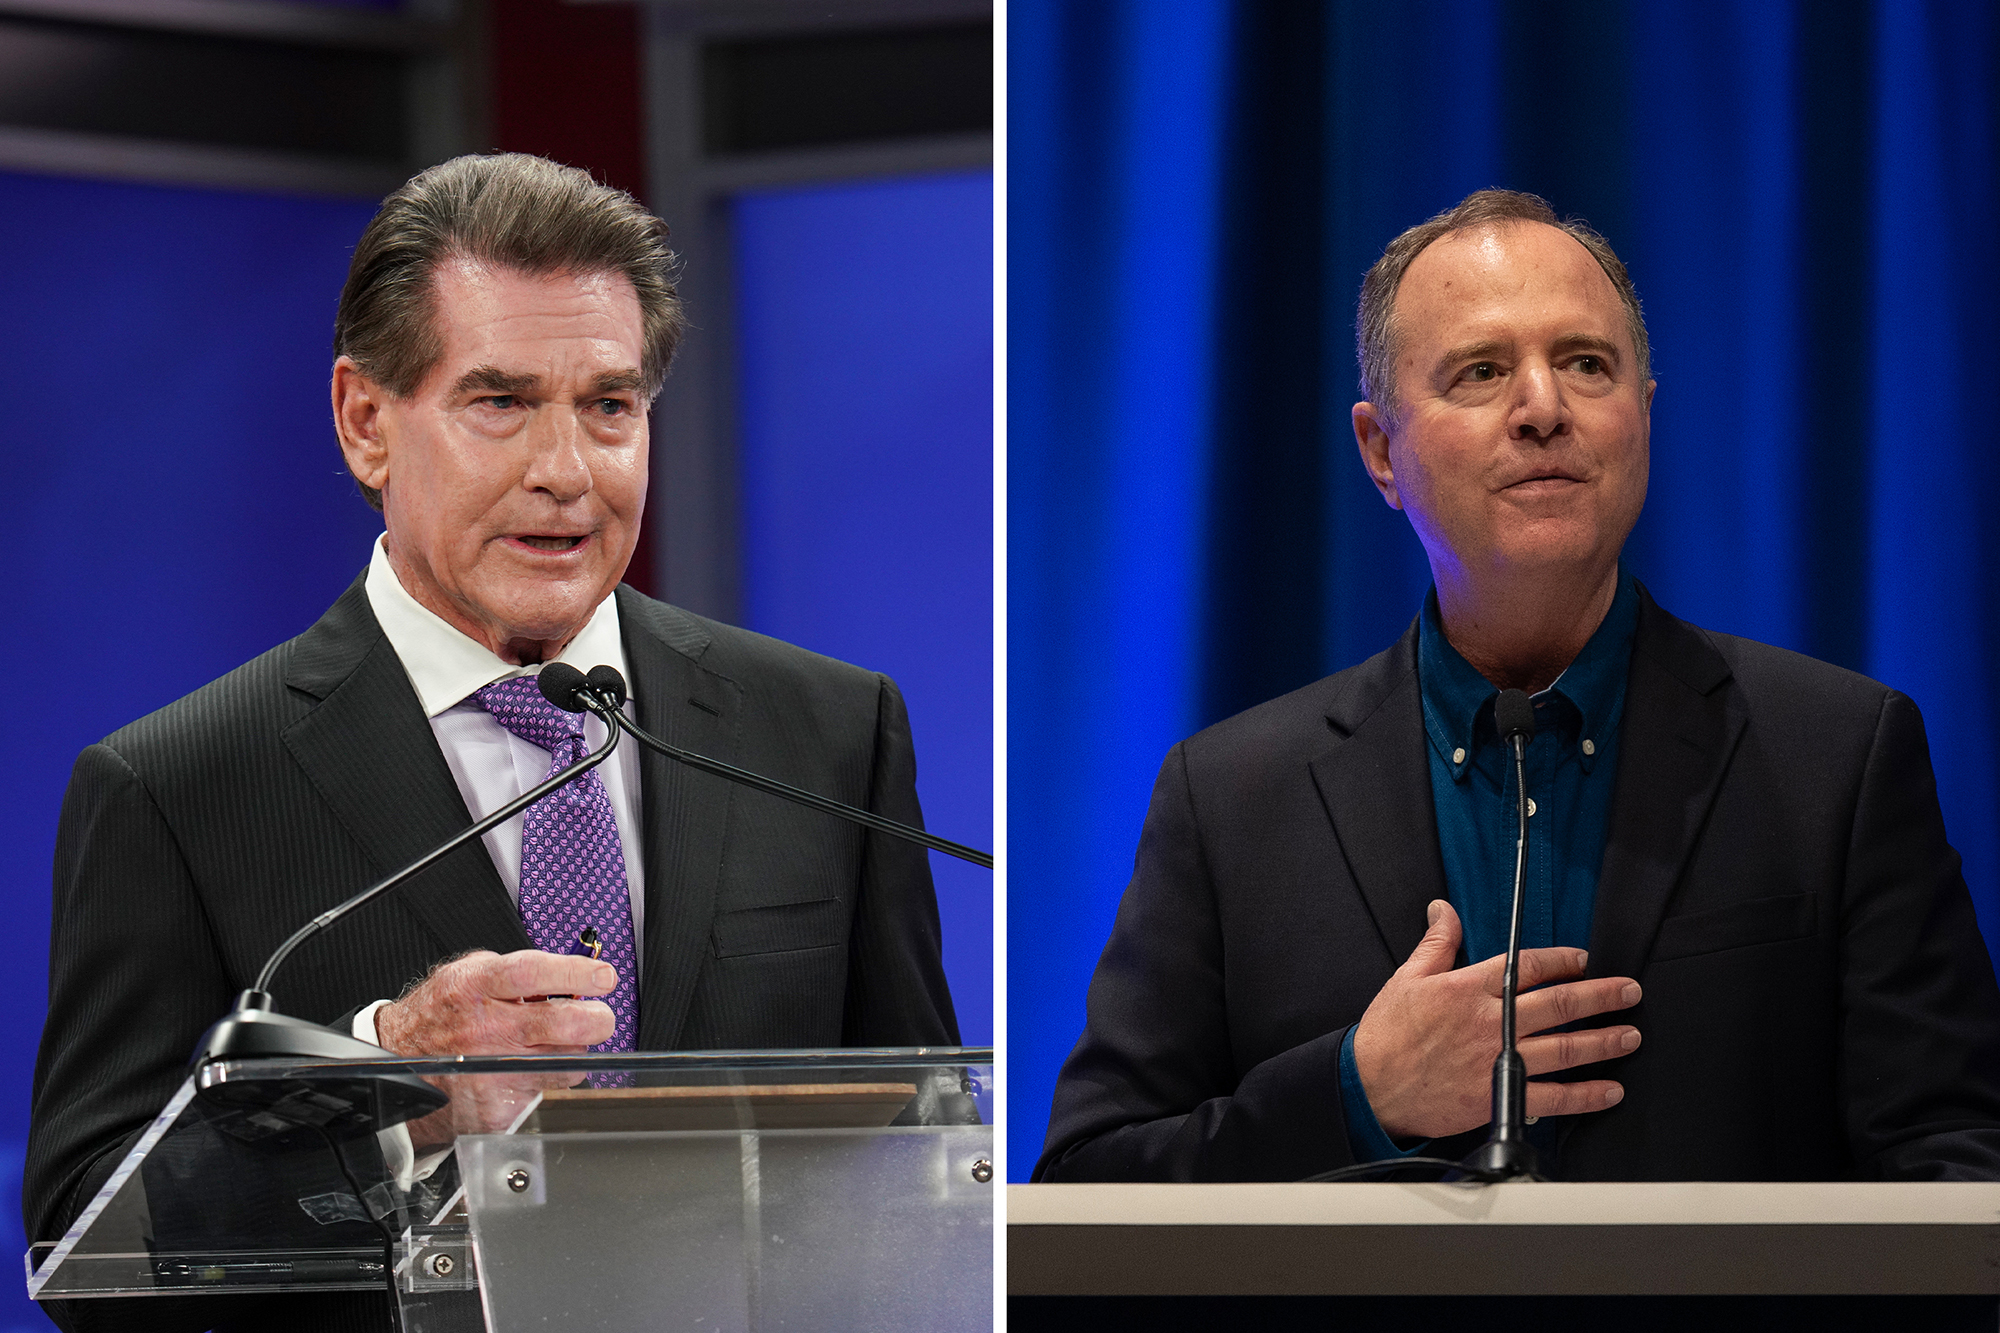 From left, Republican candidate for U.S. Senate, Steve Garvey, and U.S. Rep. Adam Schiff. Photos by NewsNation and Miguel Gutierrez Jr., CalMatters